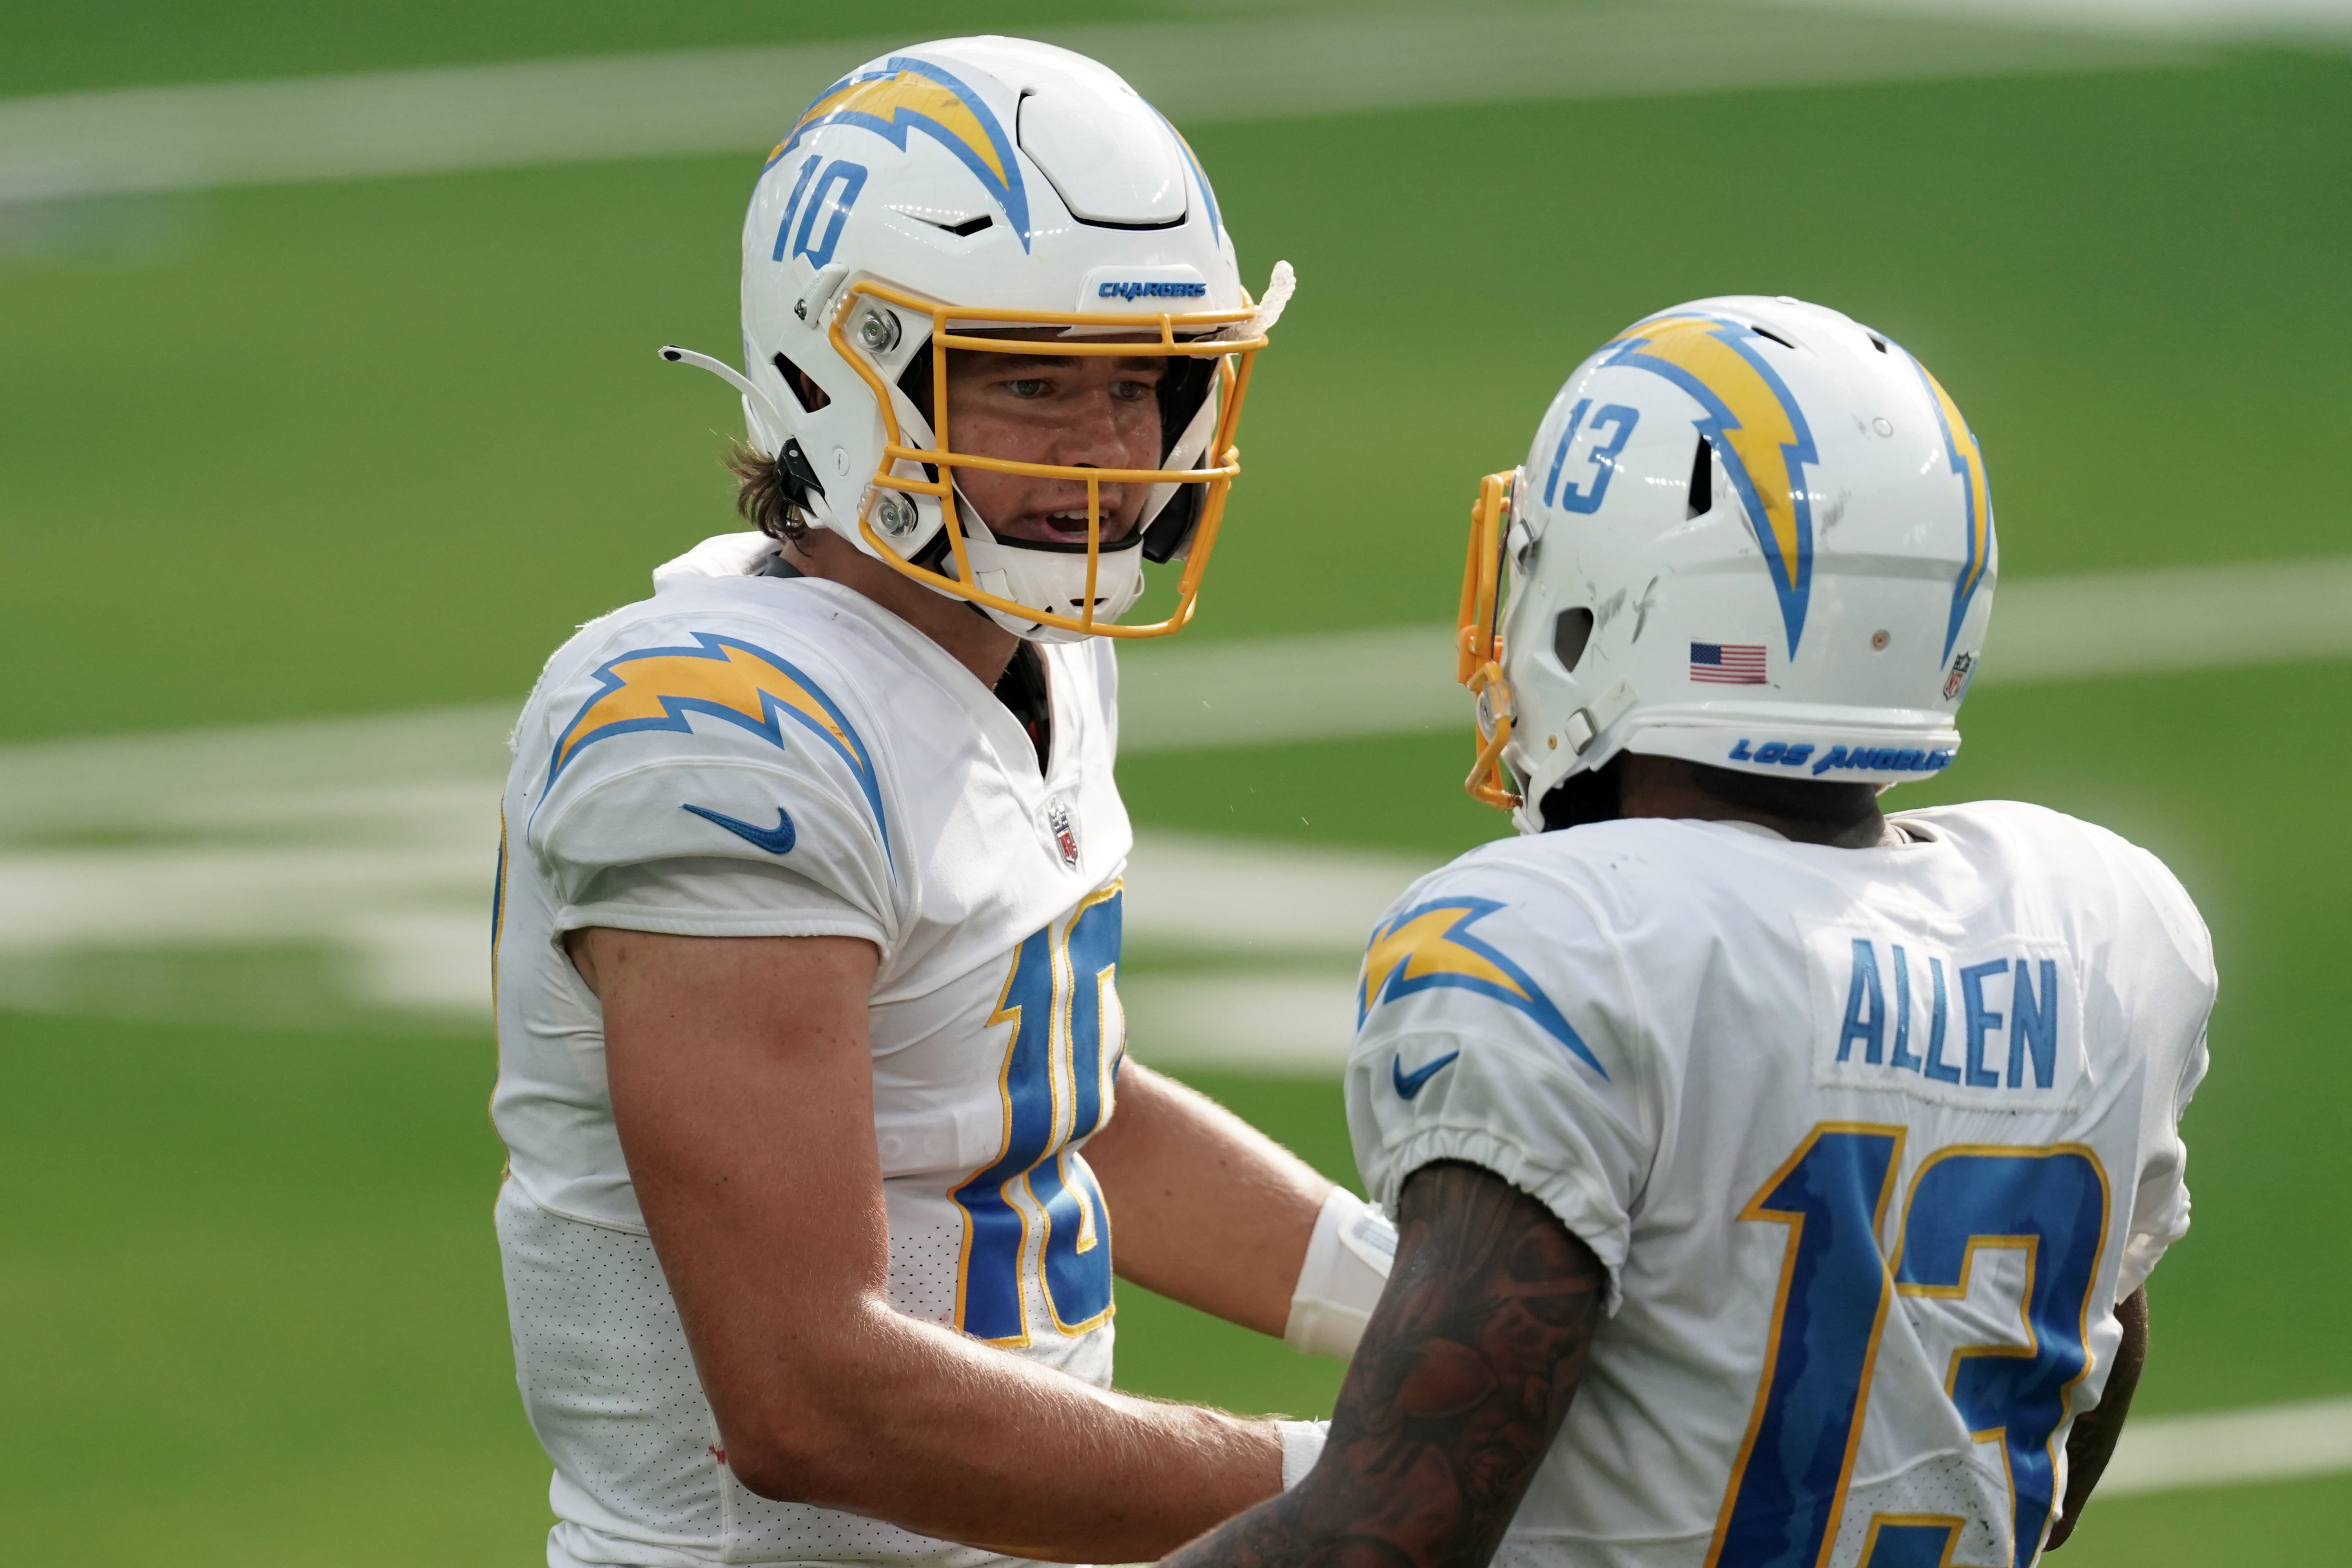 NFL: Carolina Panthers at Los Angeles Chargers